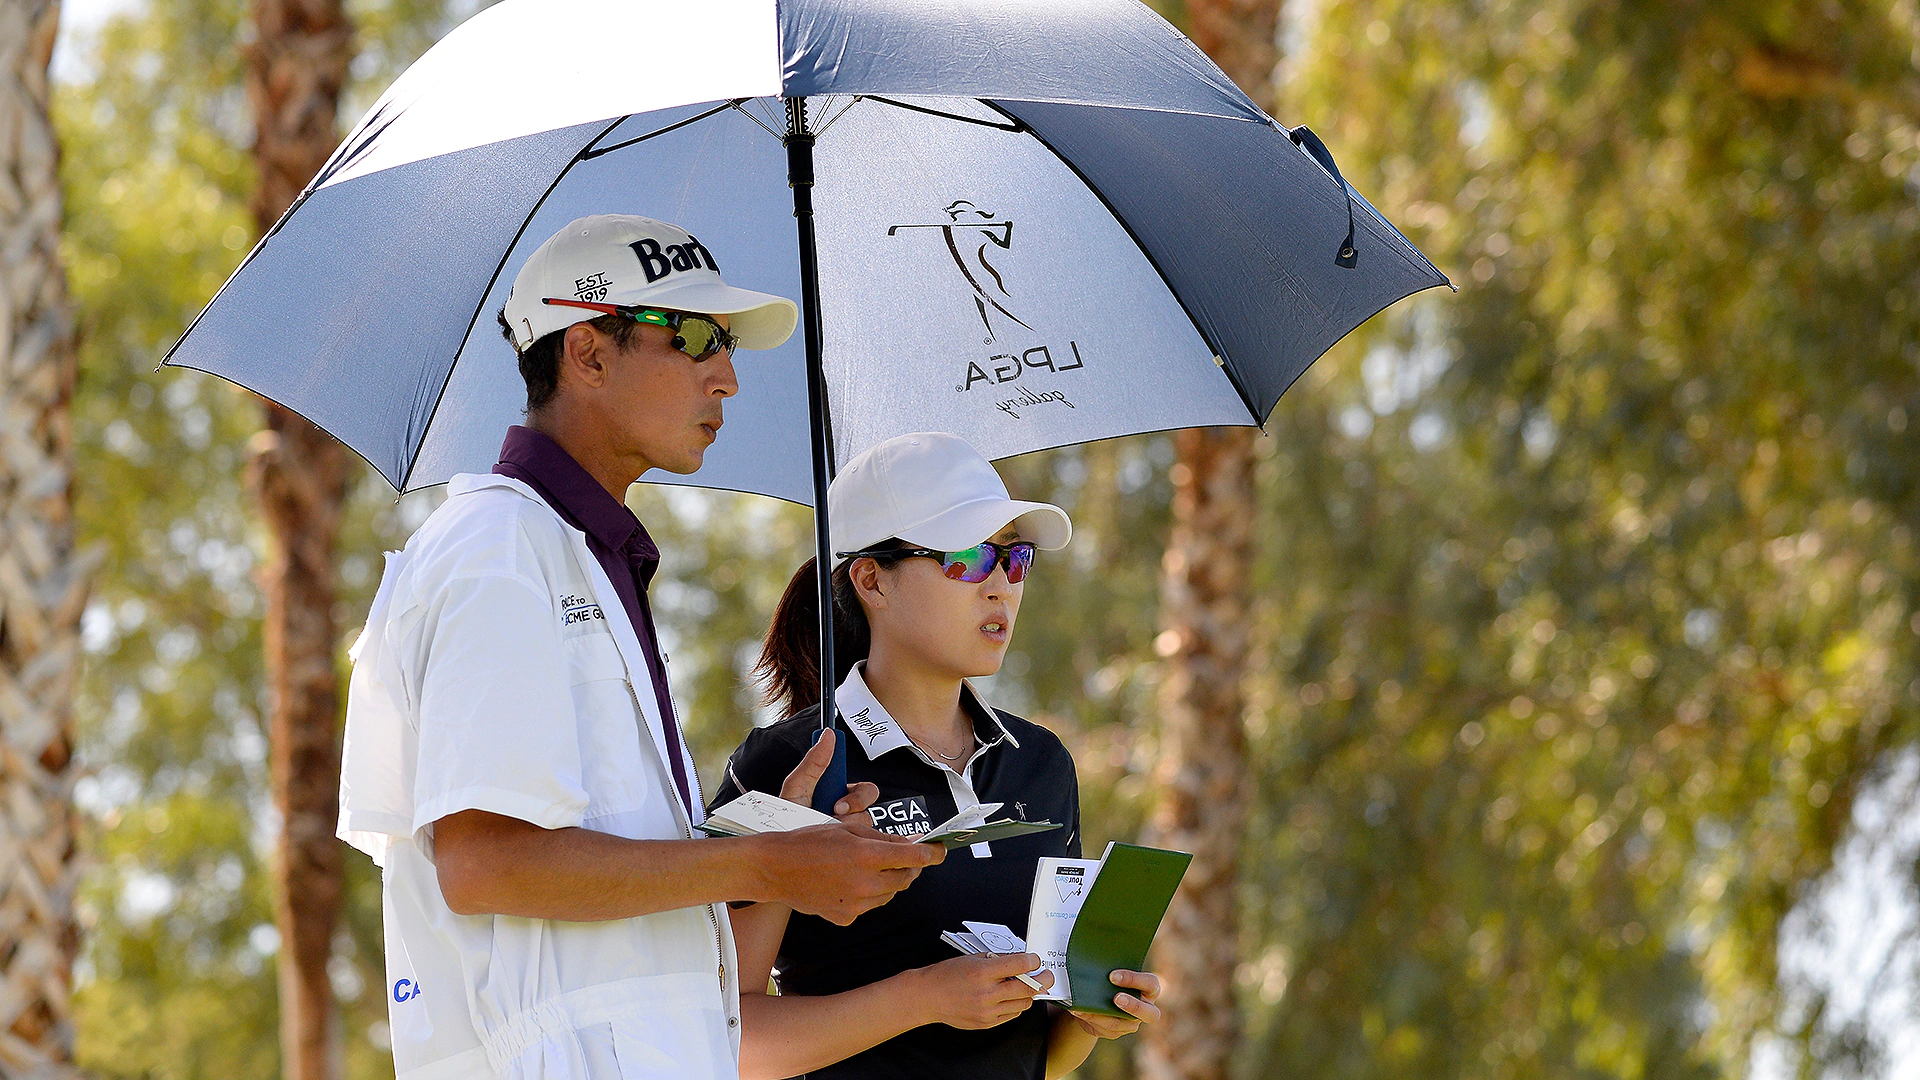 LPGA to allow caddies in carts to cope with extreme heat at ANA Inspiration